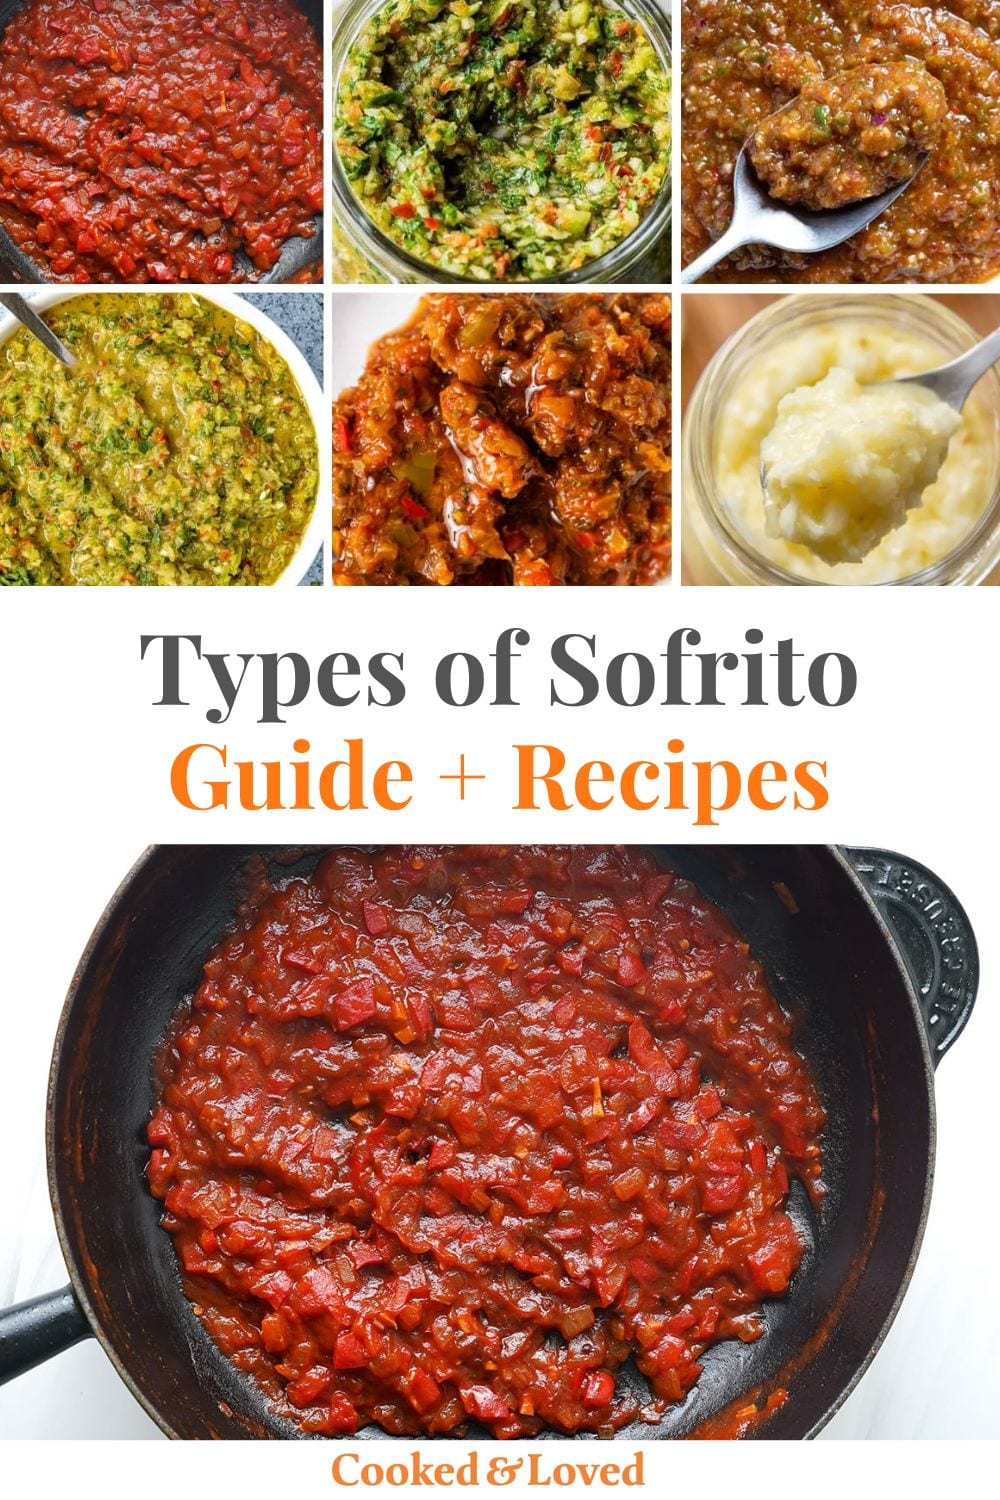 Types of Sofrito, Recipes & Guide